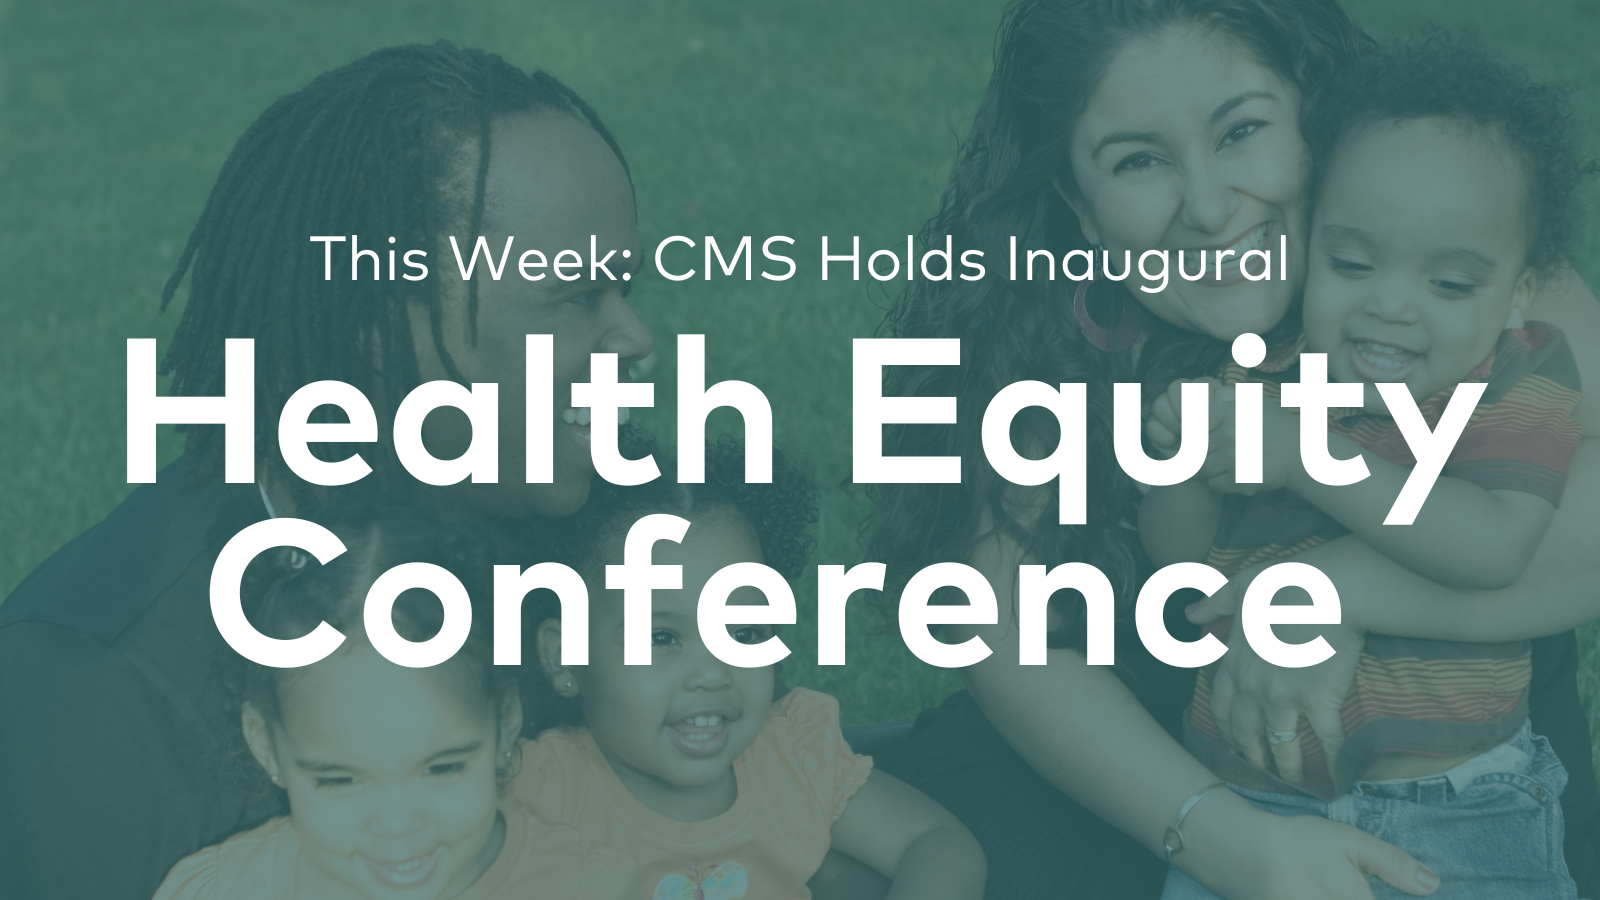 This Week CMS Holds Inaugural Health Equity Conference Primary Care